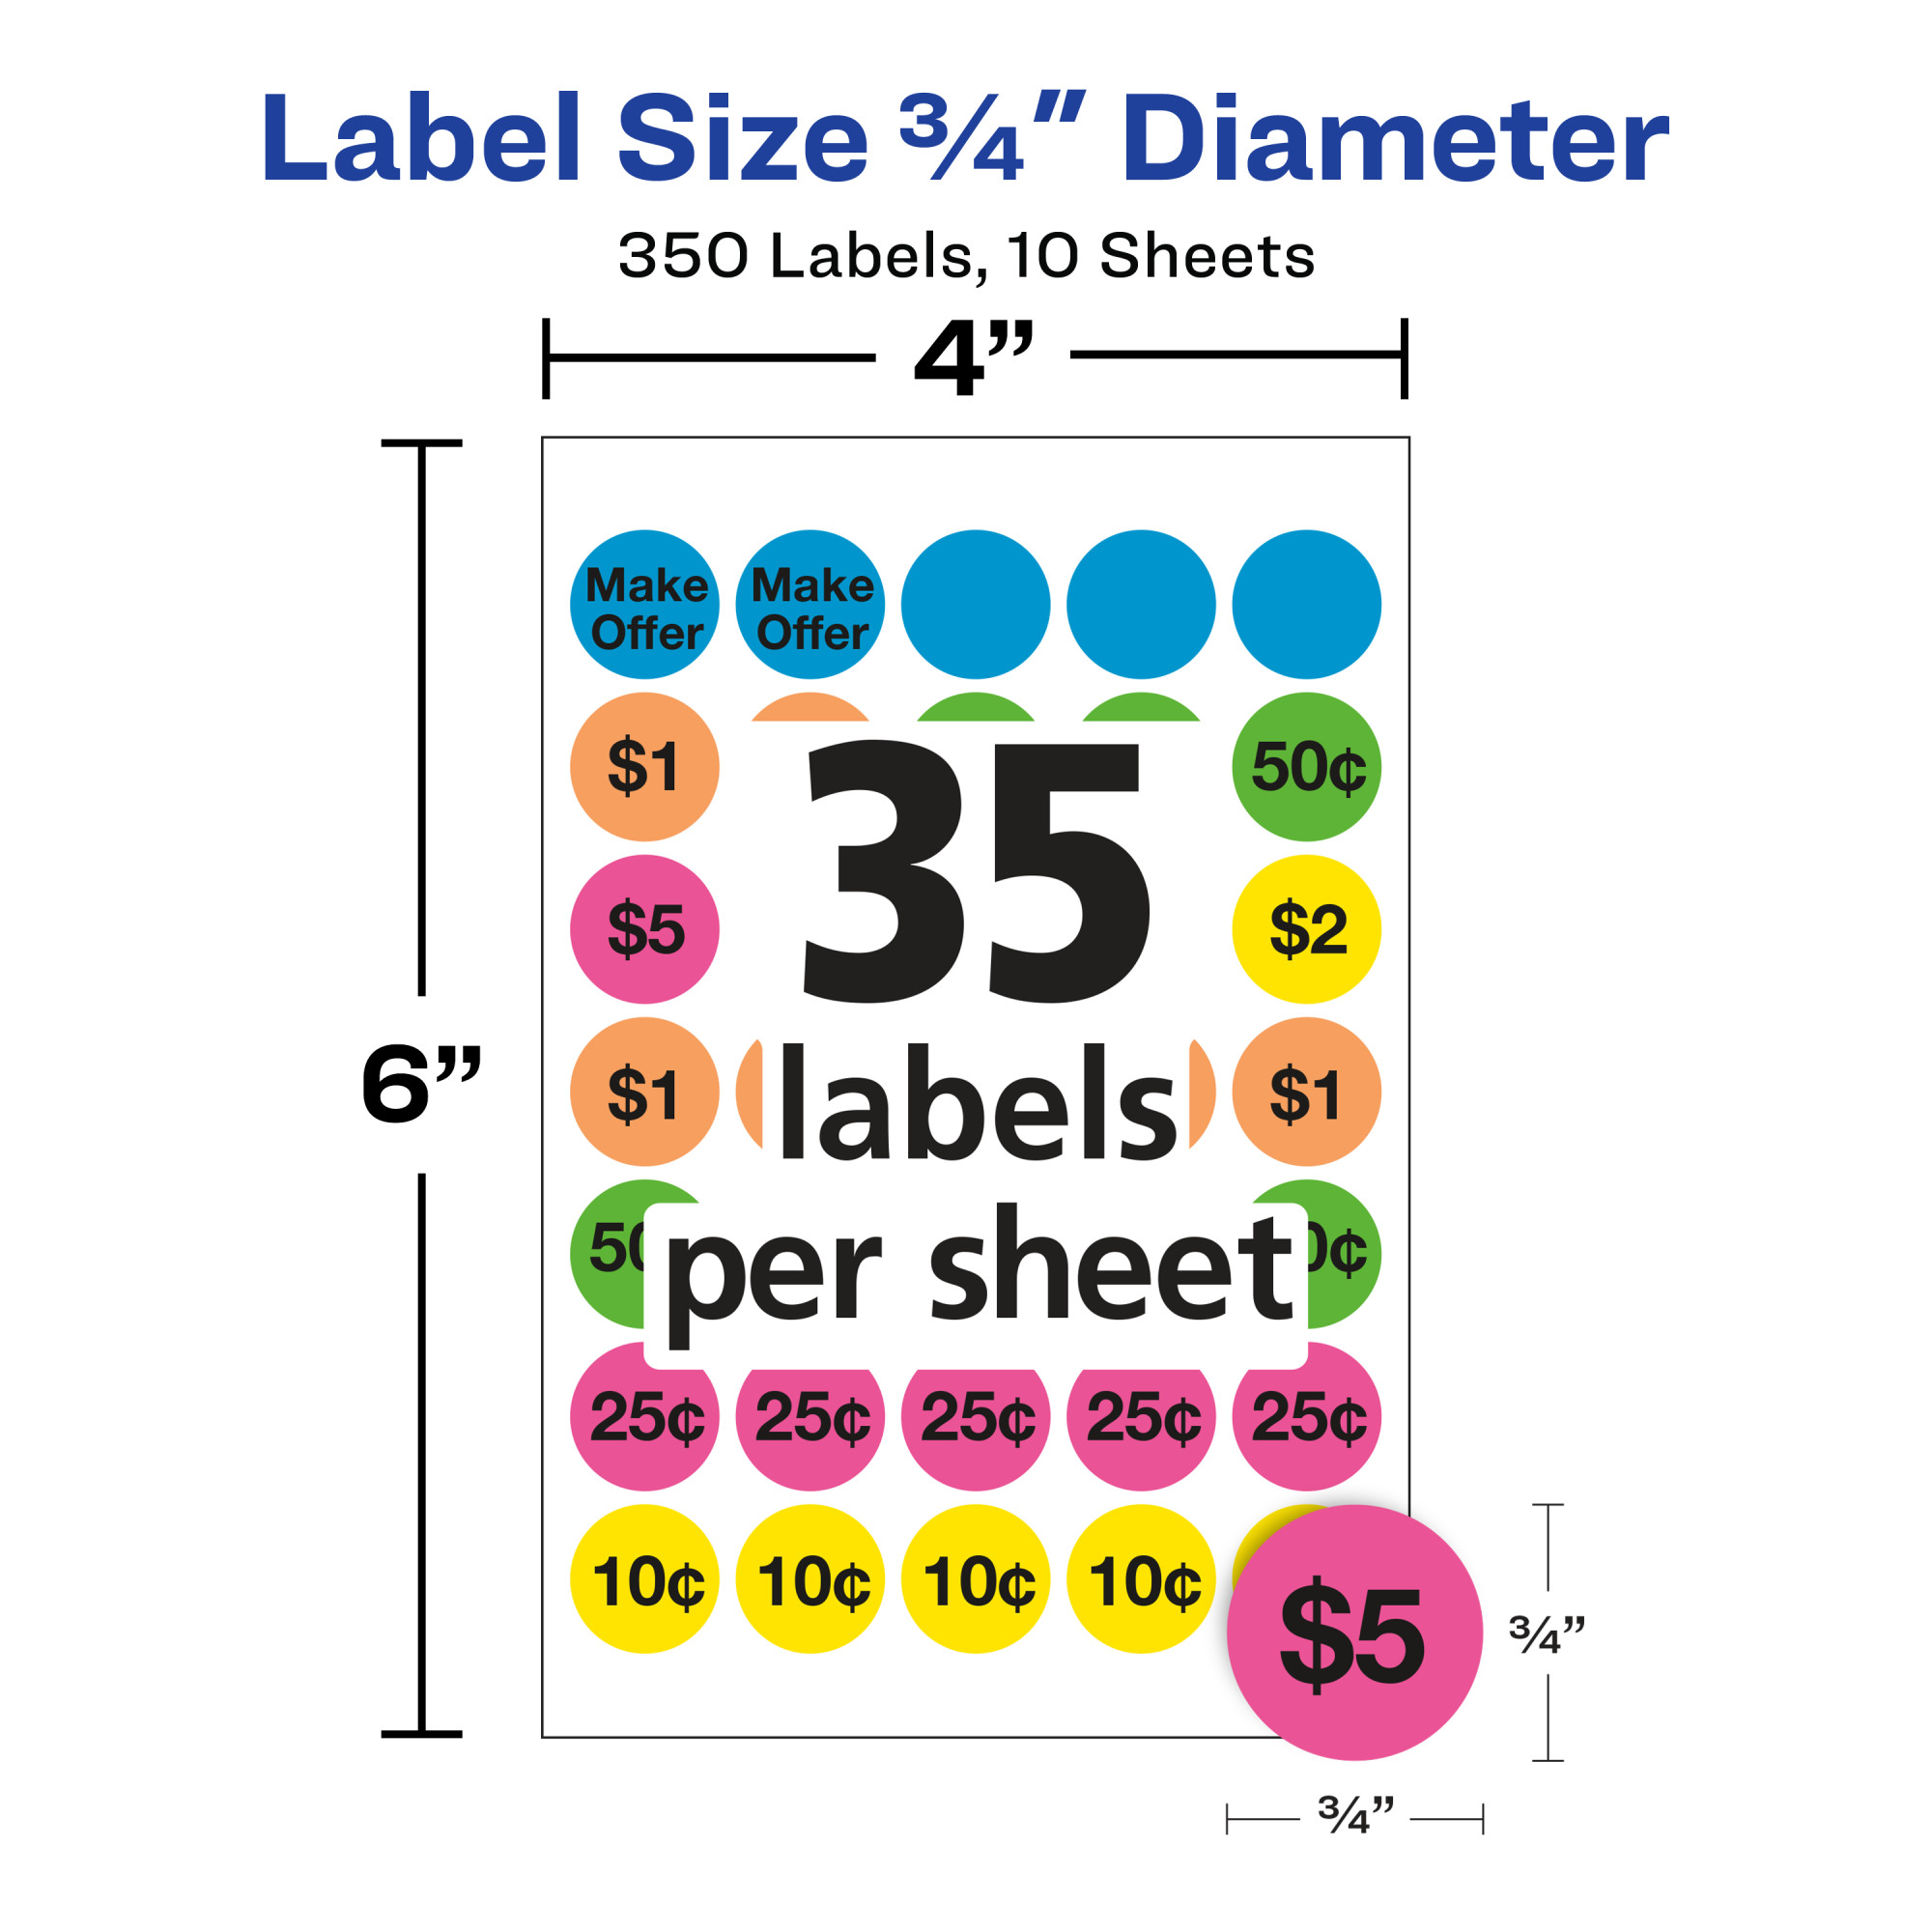 Avery Garage Sale Labels, 3/4" Round Stickers, Assorted Colors, Non-Printable, 350 Pricing Labels (5480) - image 5 of 5